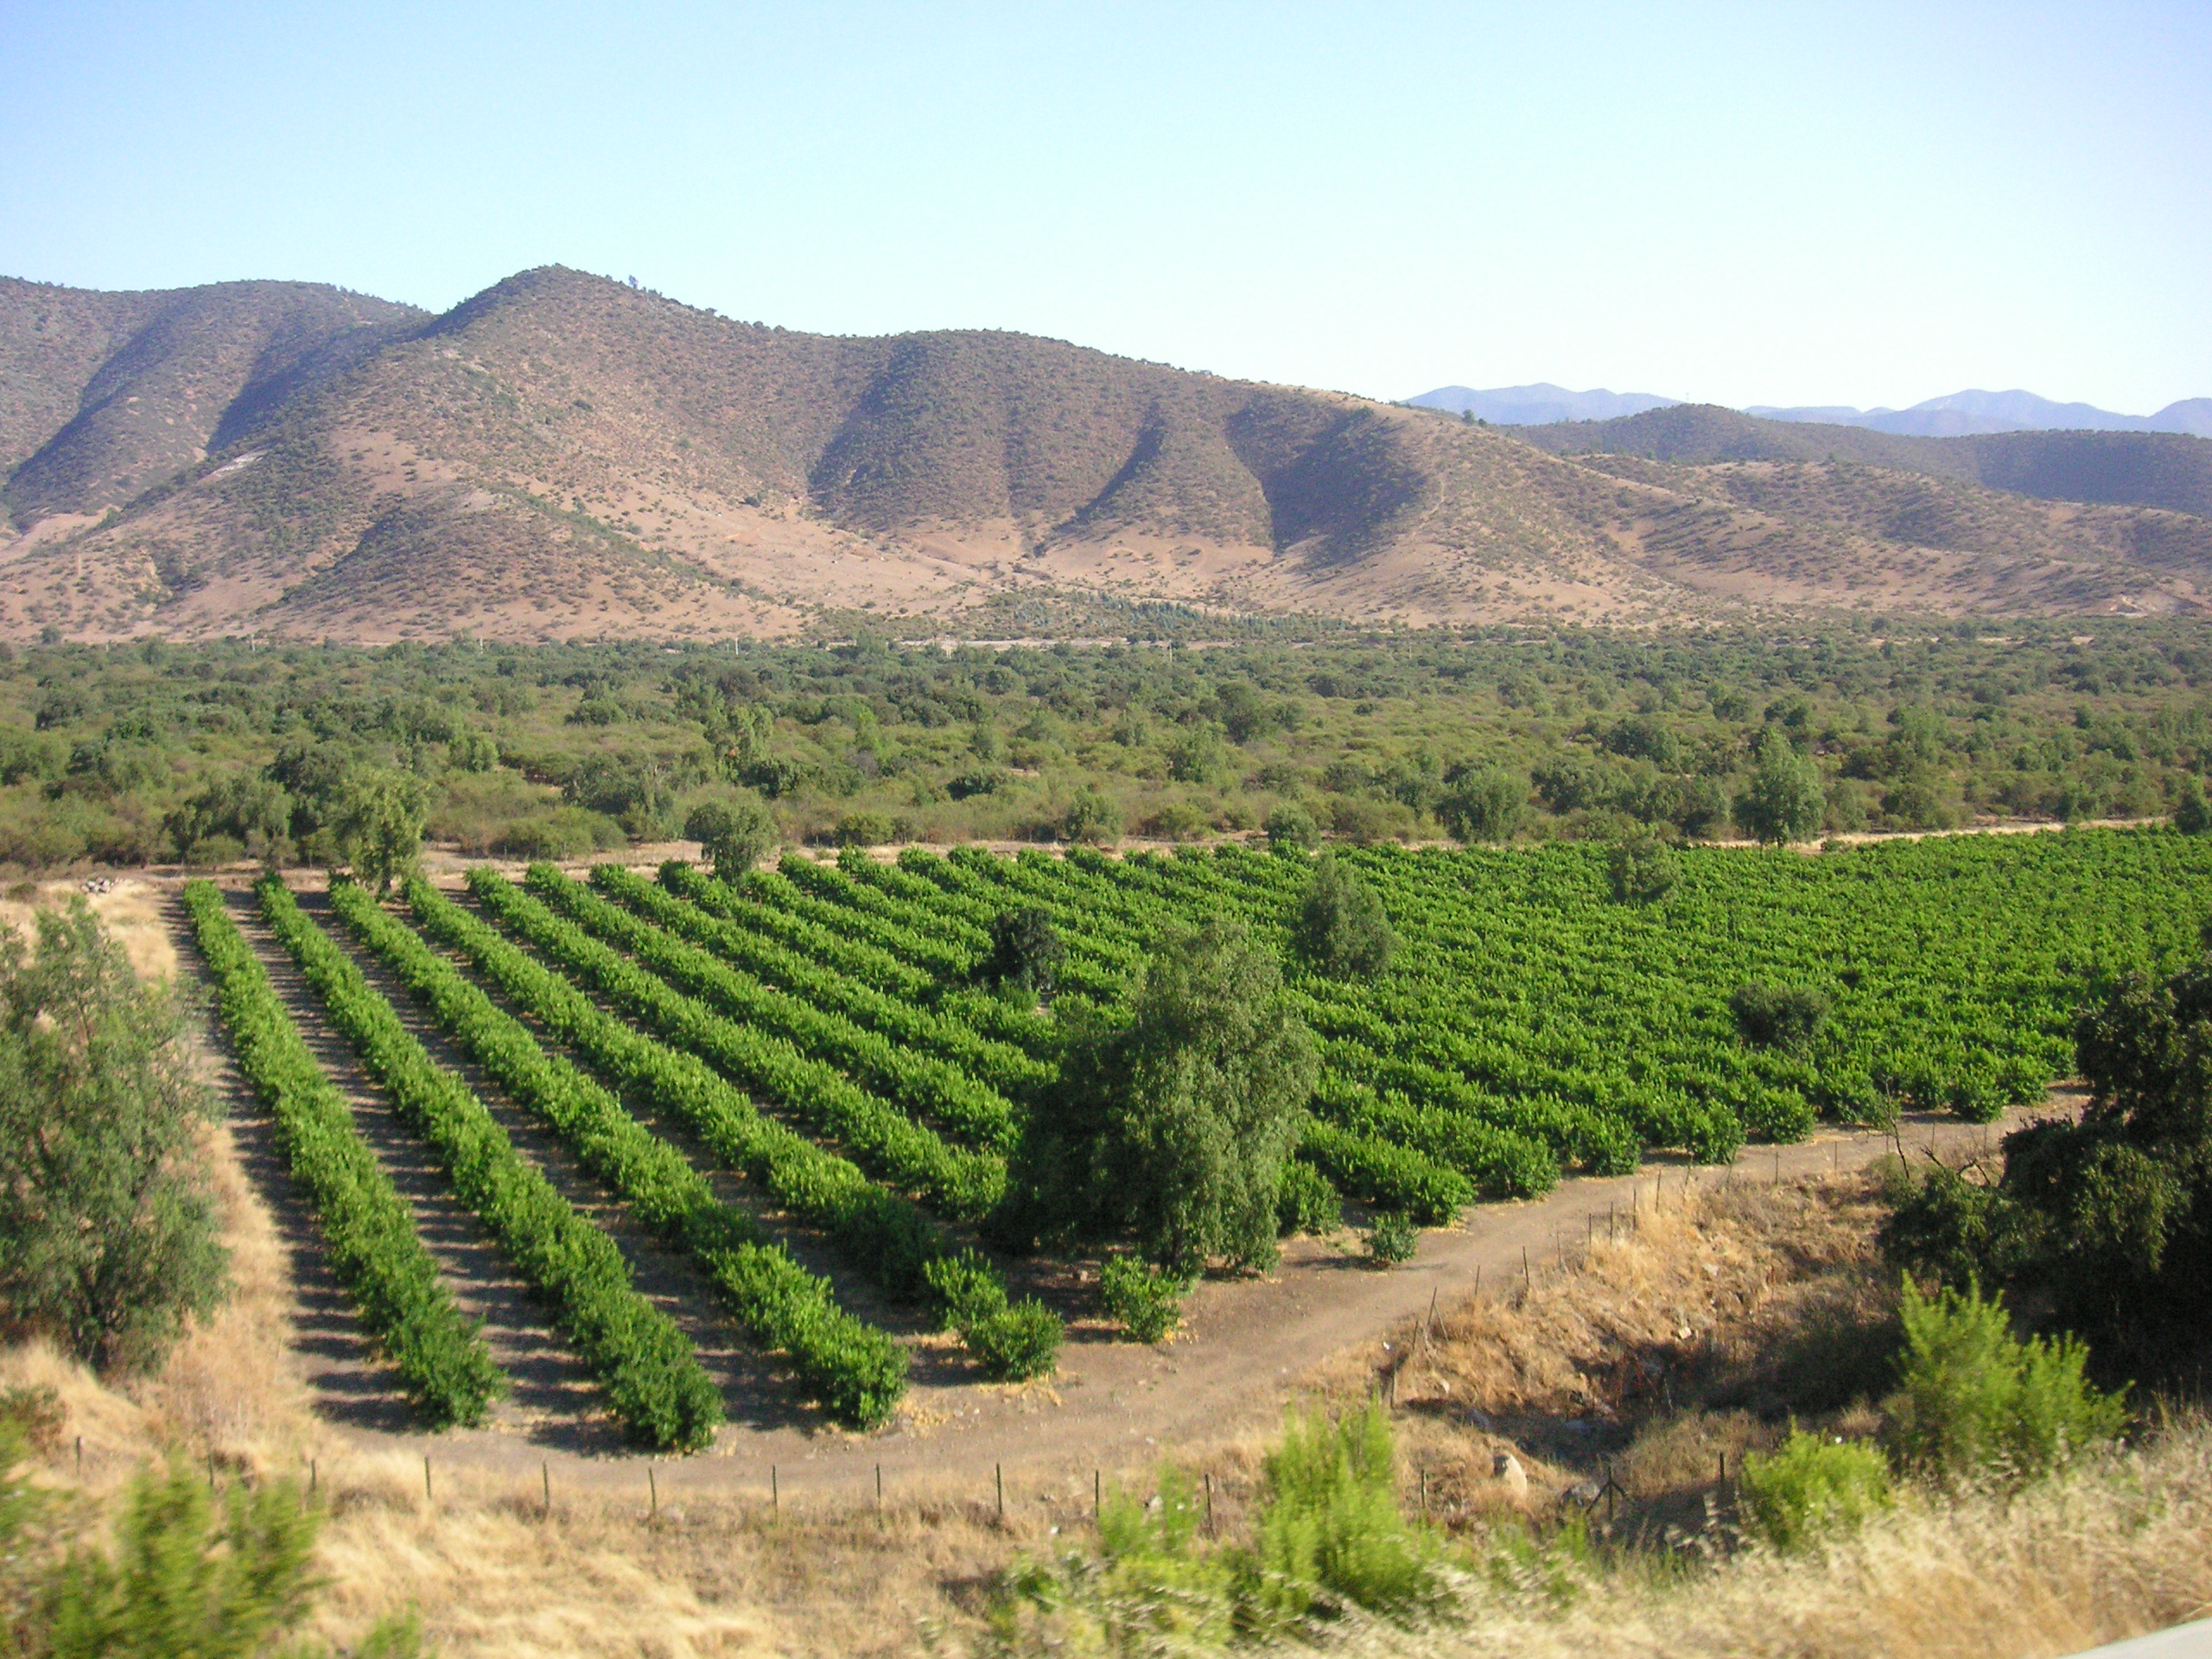 http://upload.wikimedia.org/wikipedia/commons/e/e4/Chilean_vineyard_in_Andes_foothills.jpg